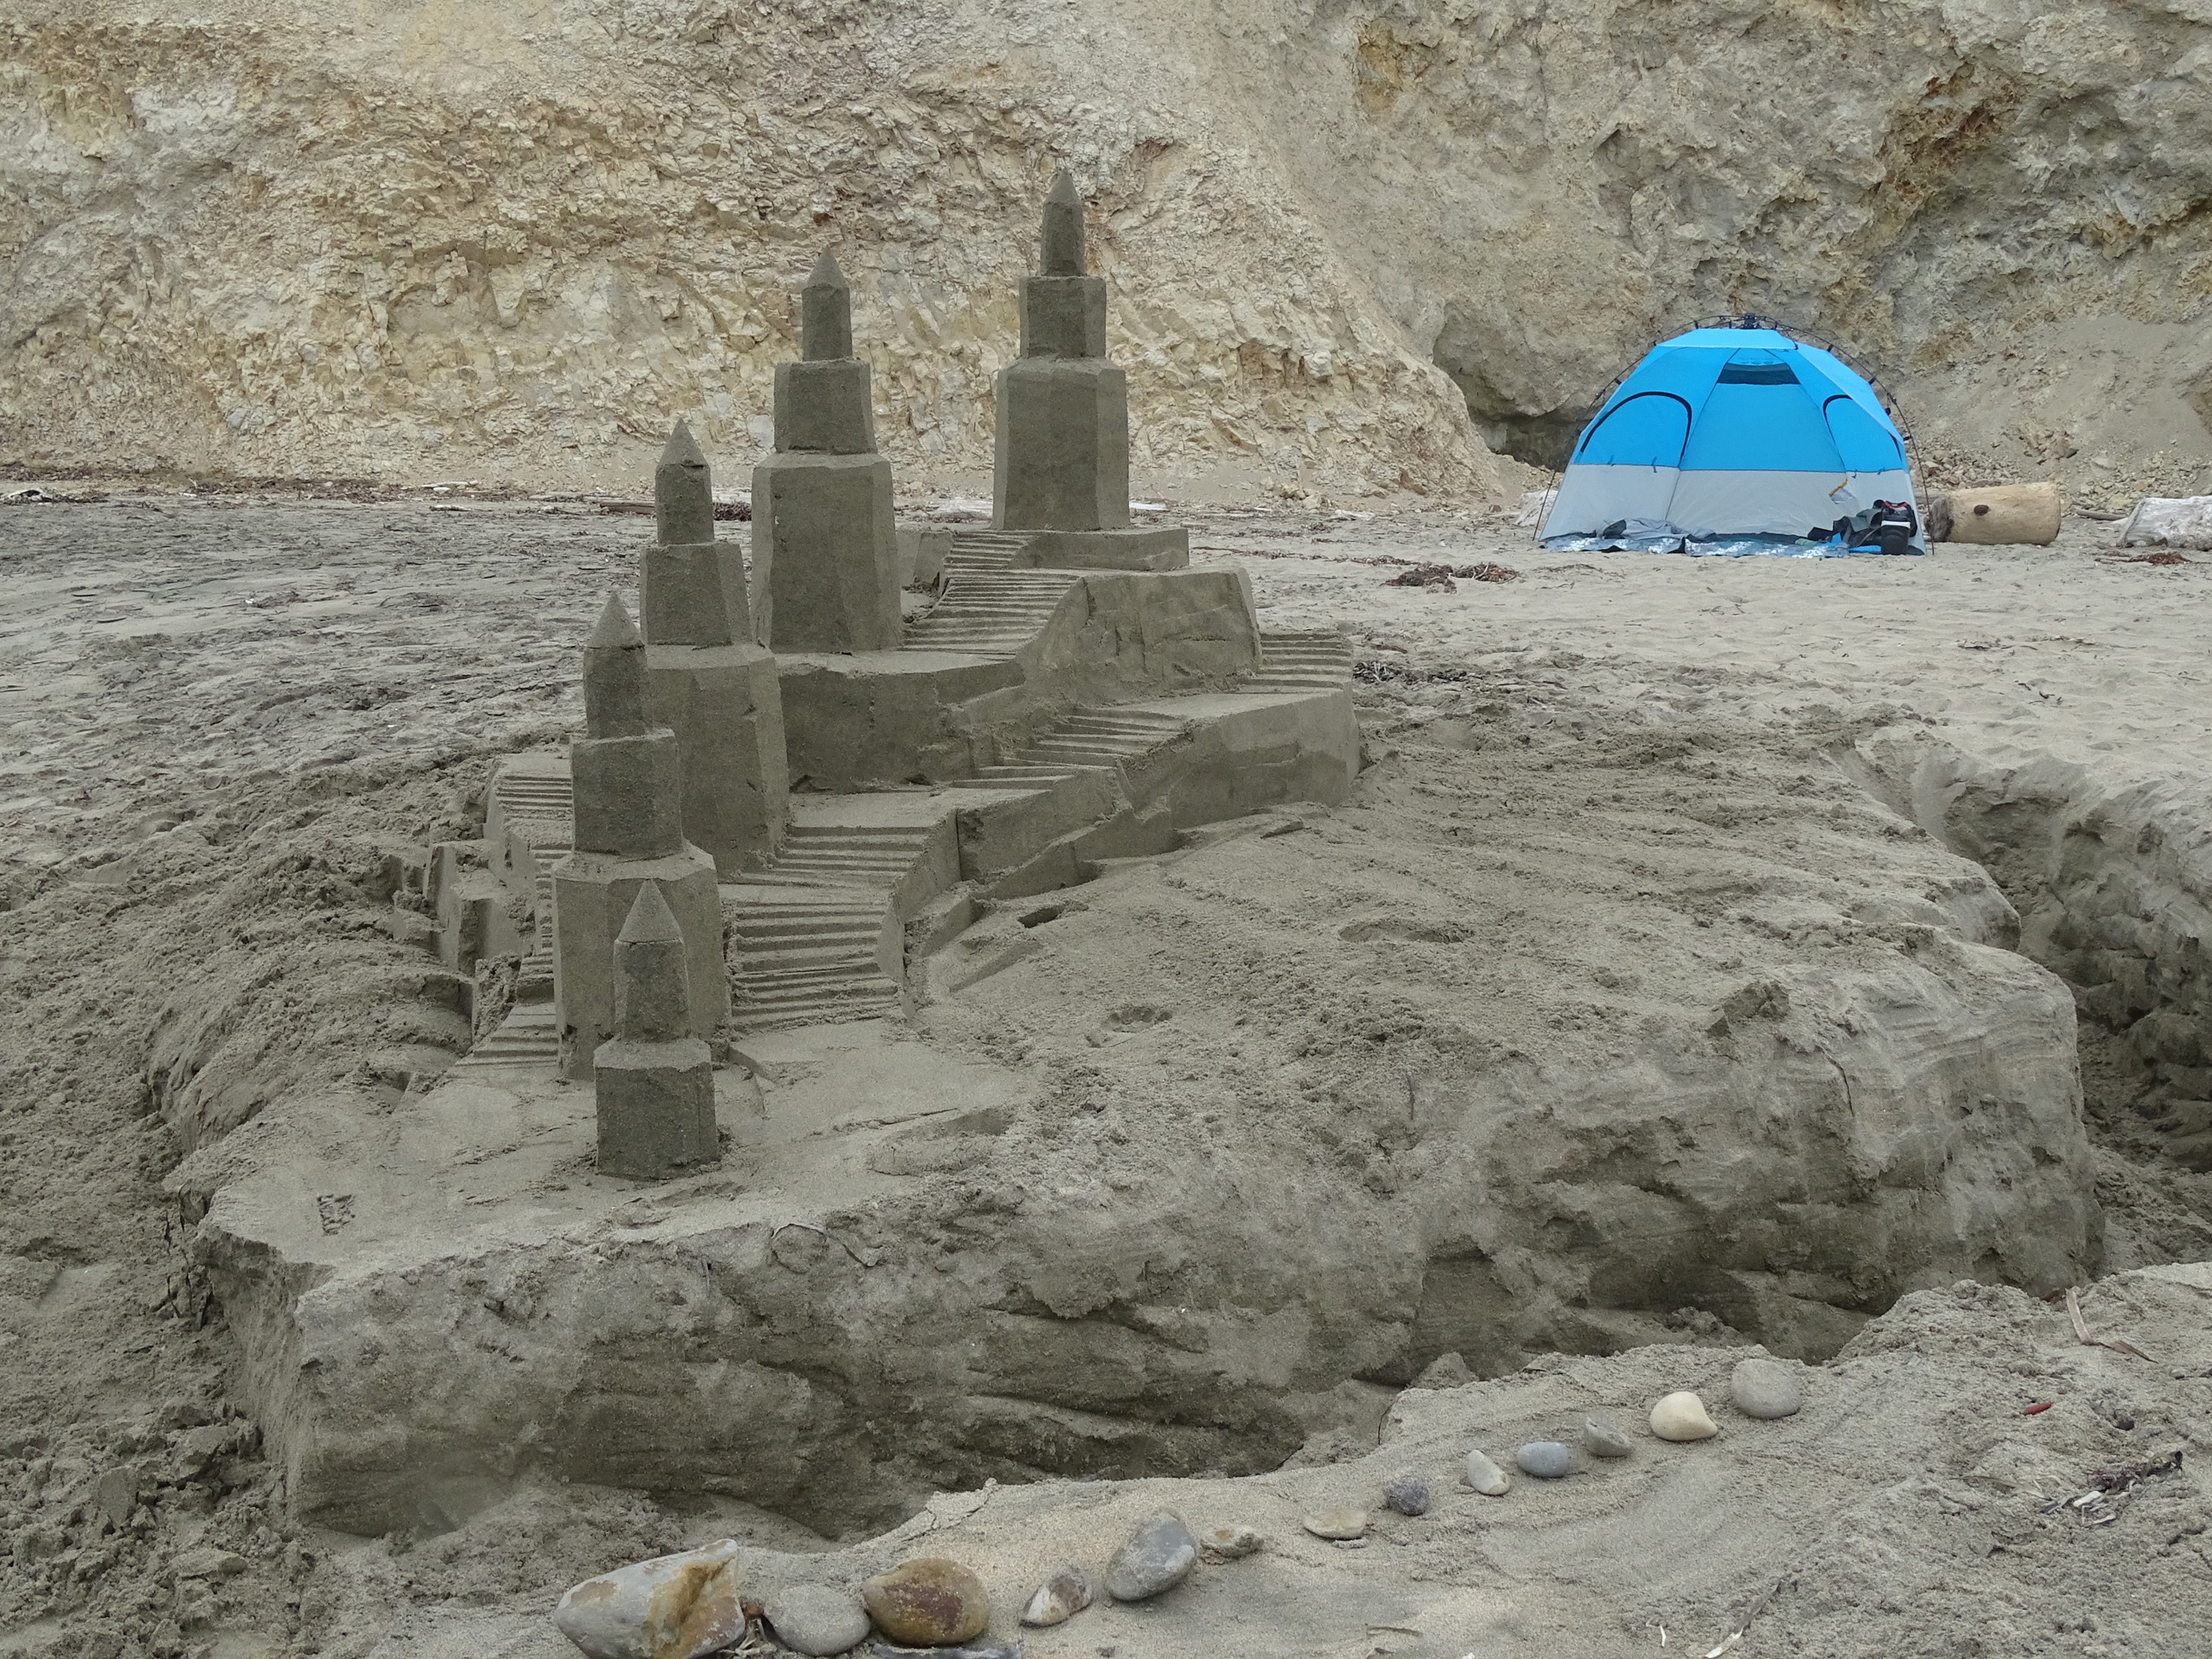 A large sand sculpture of a castle with five octagonally shaped towers and lots of staircases.